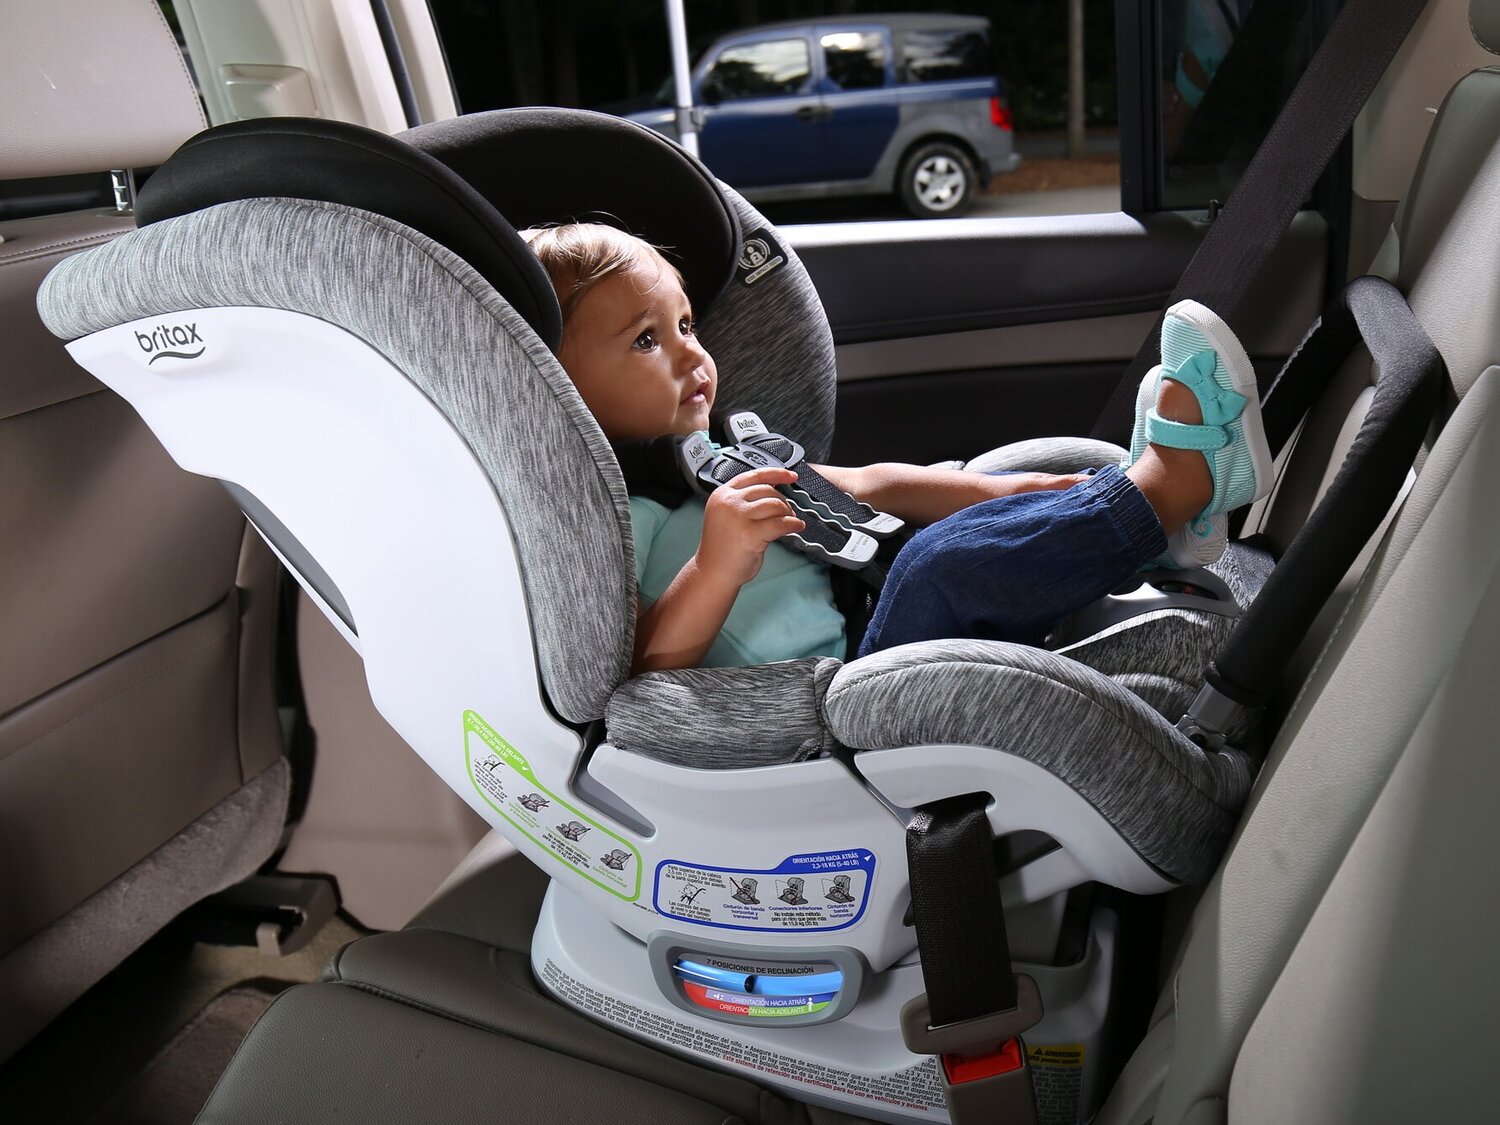 Boulevard Tight Convertible Car, How To Take The Back Off A Britax Car Seat